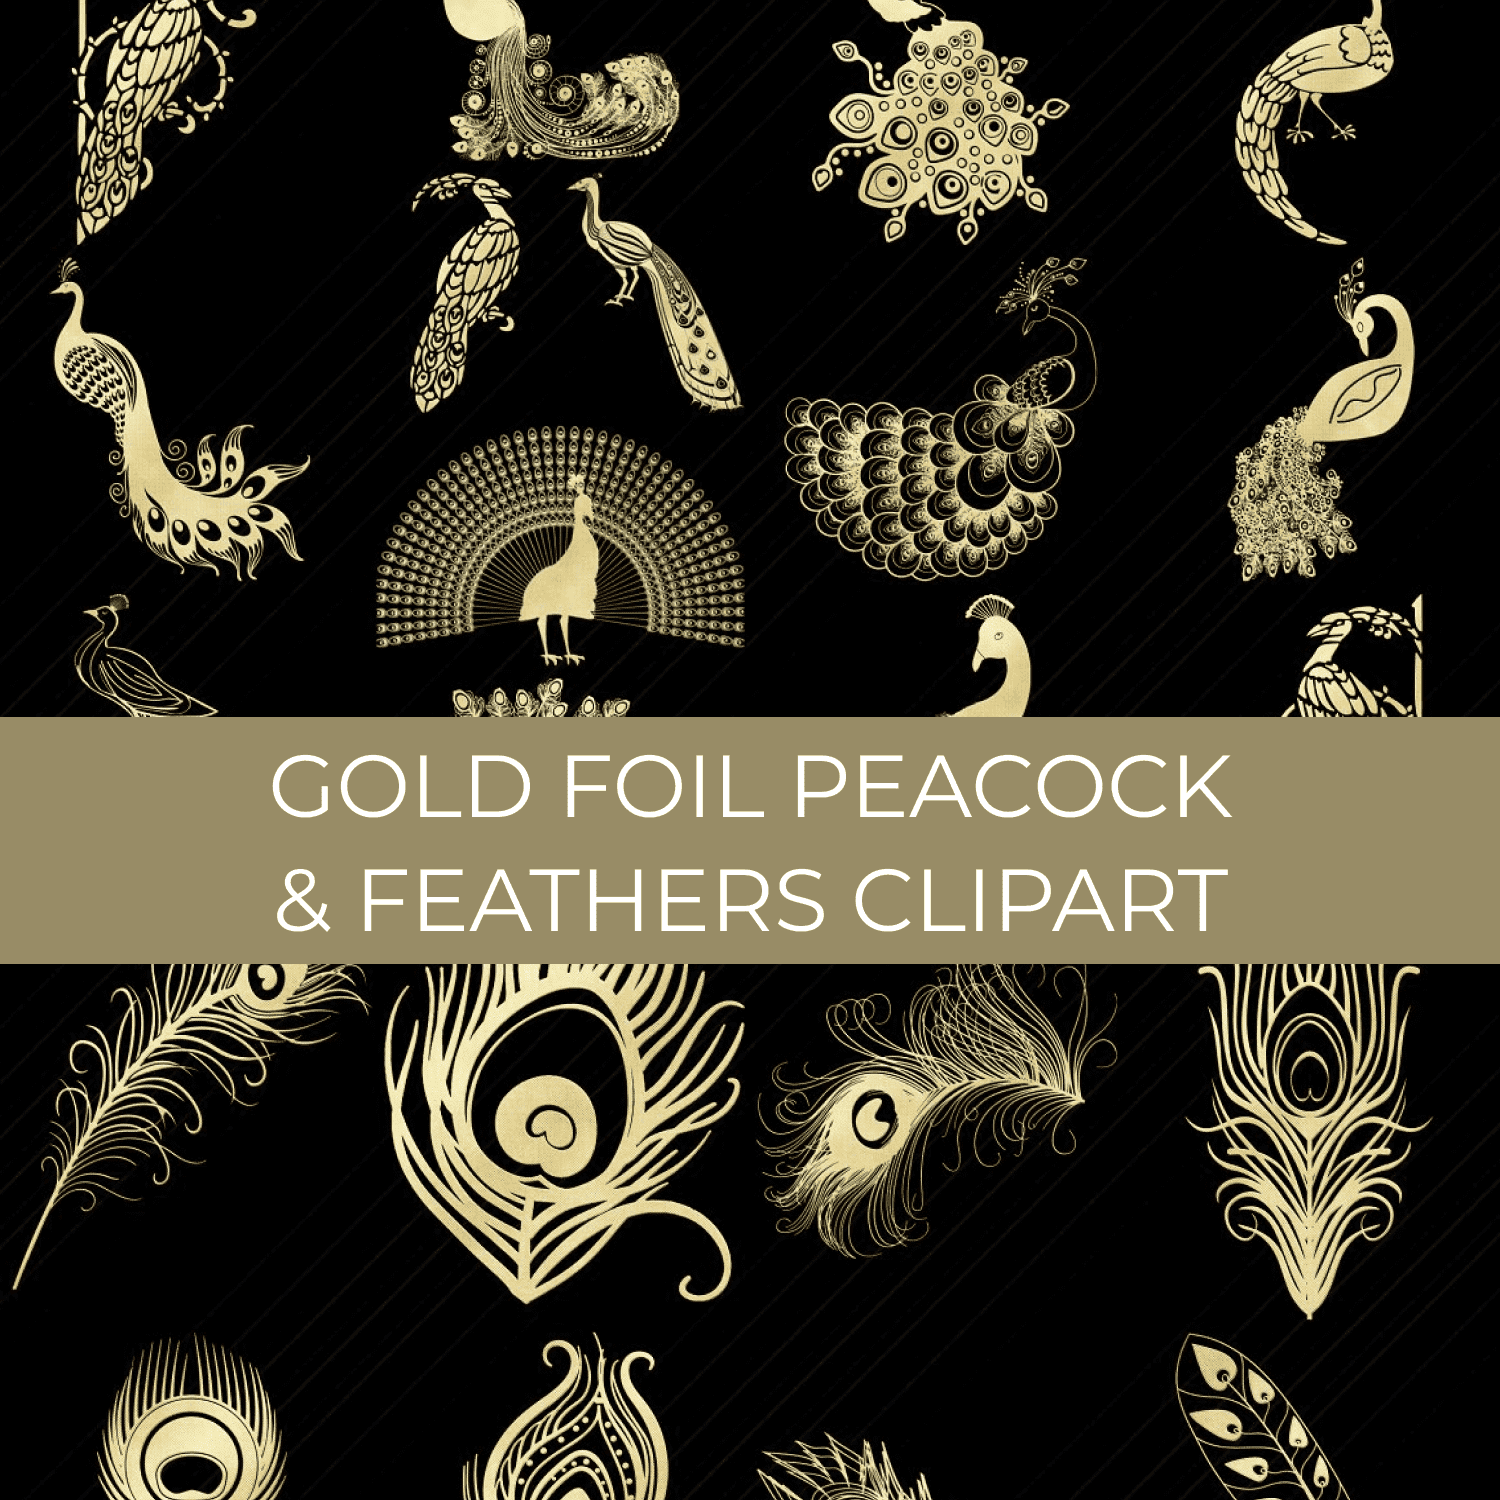 gold foil peacock feathers clipart preview image.